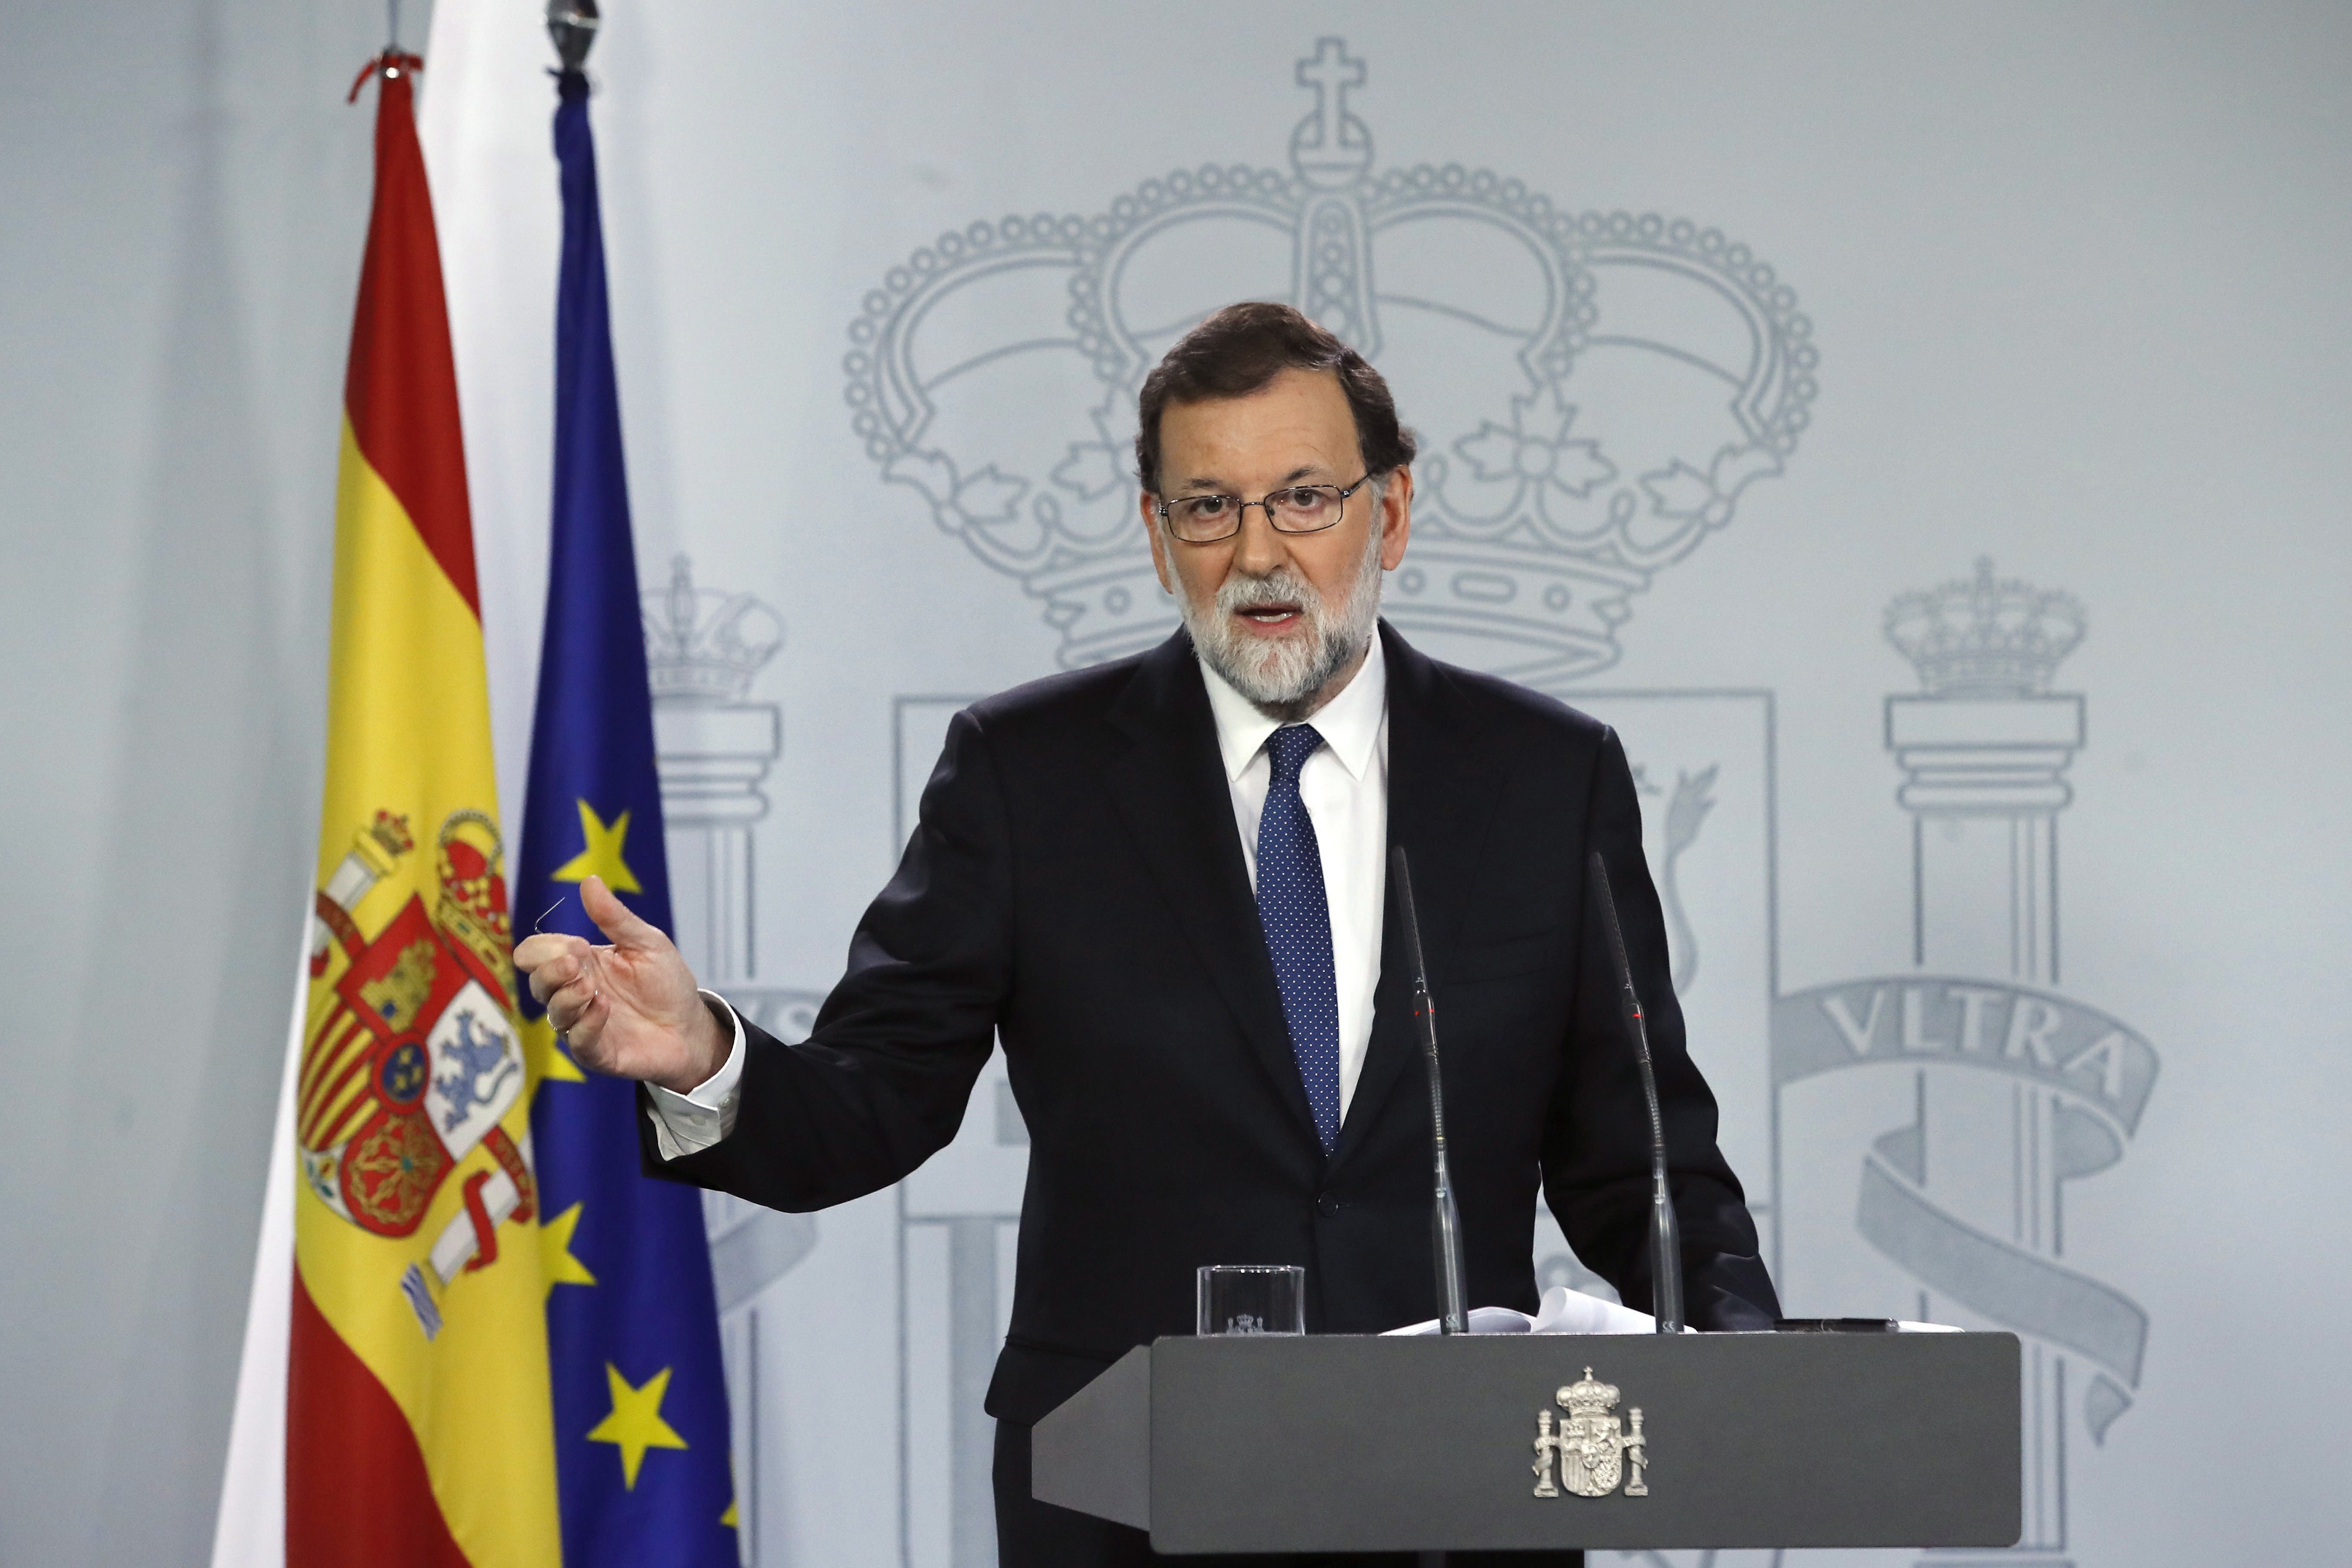 European politicians question Spanish democracy after blow against Catalonia